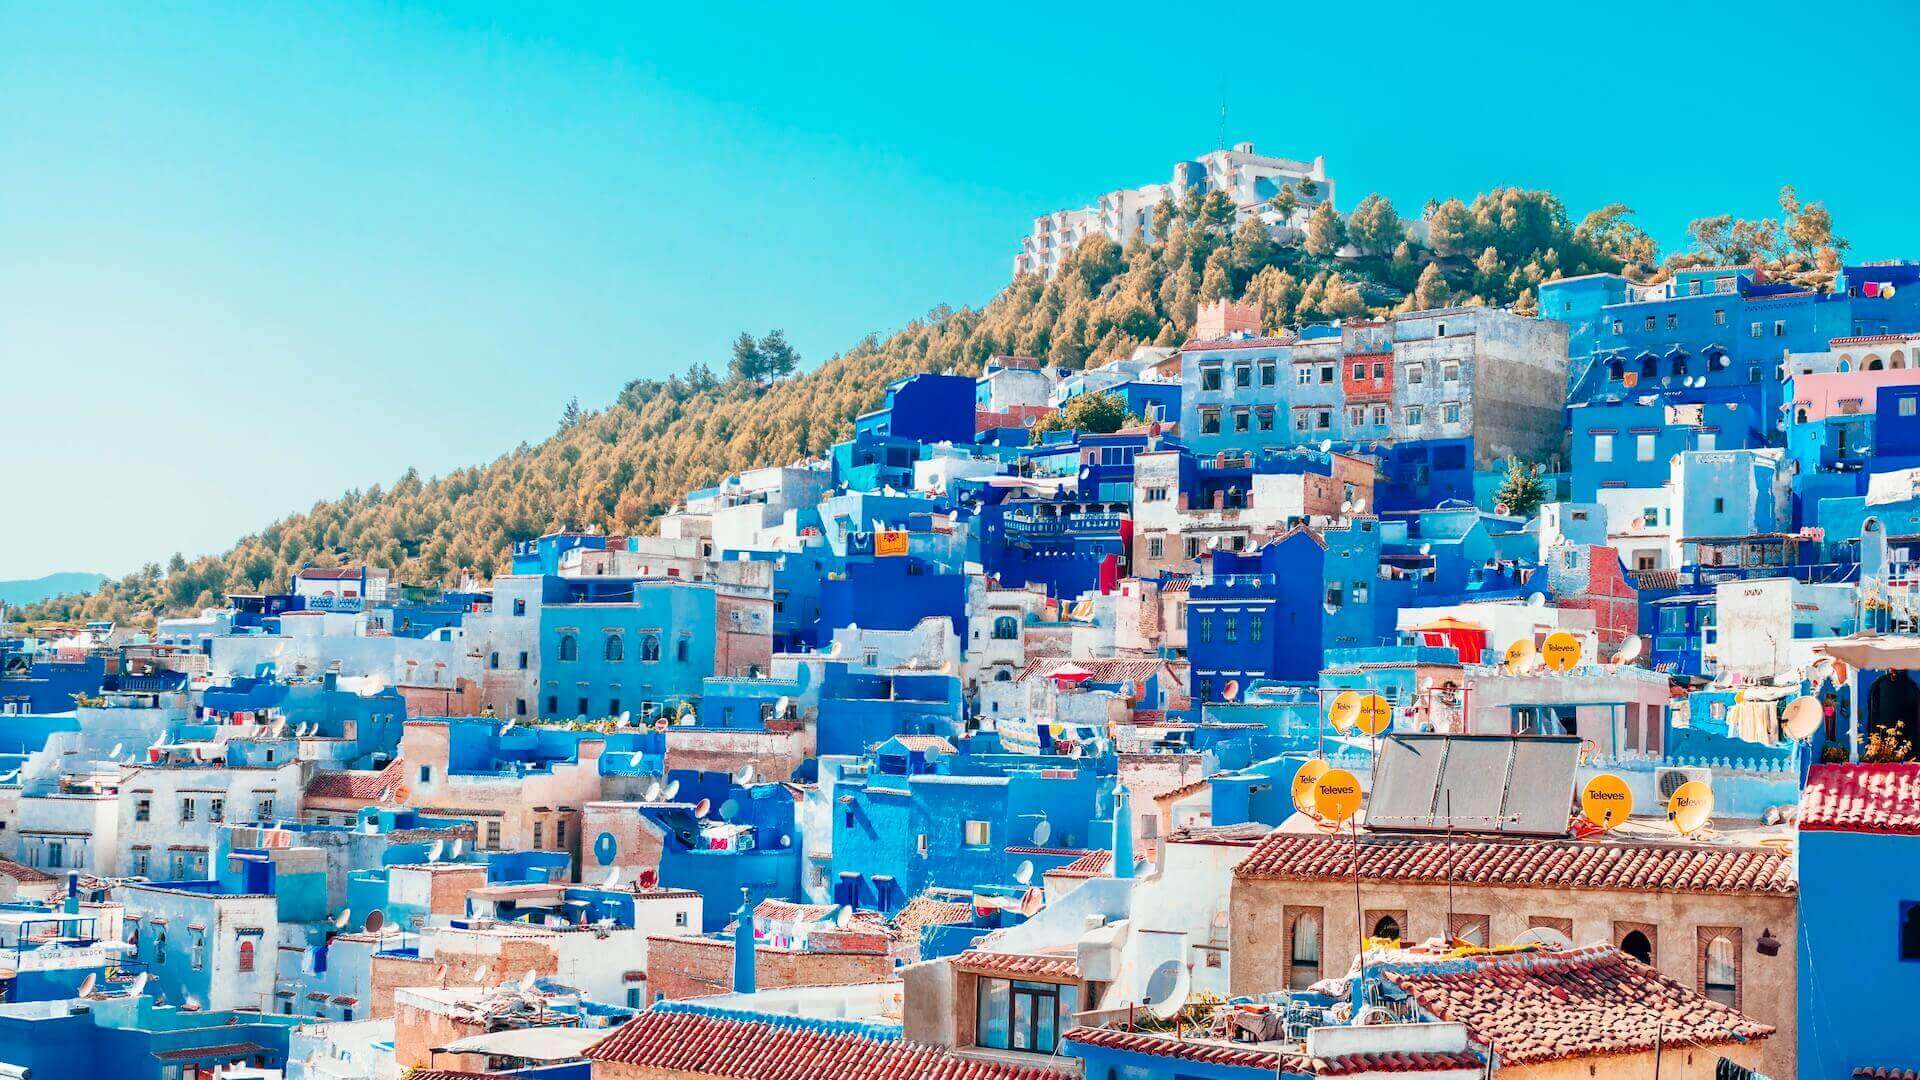 Best Things To Do In Chefchaouen: A Complete Guide To Morocco's Blue City | Travel Blog - Blog About Traveling | The Broad Life